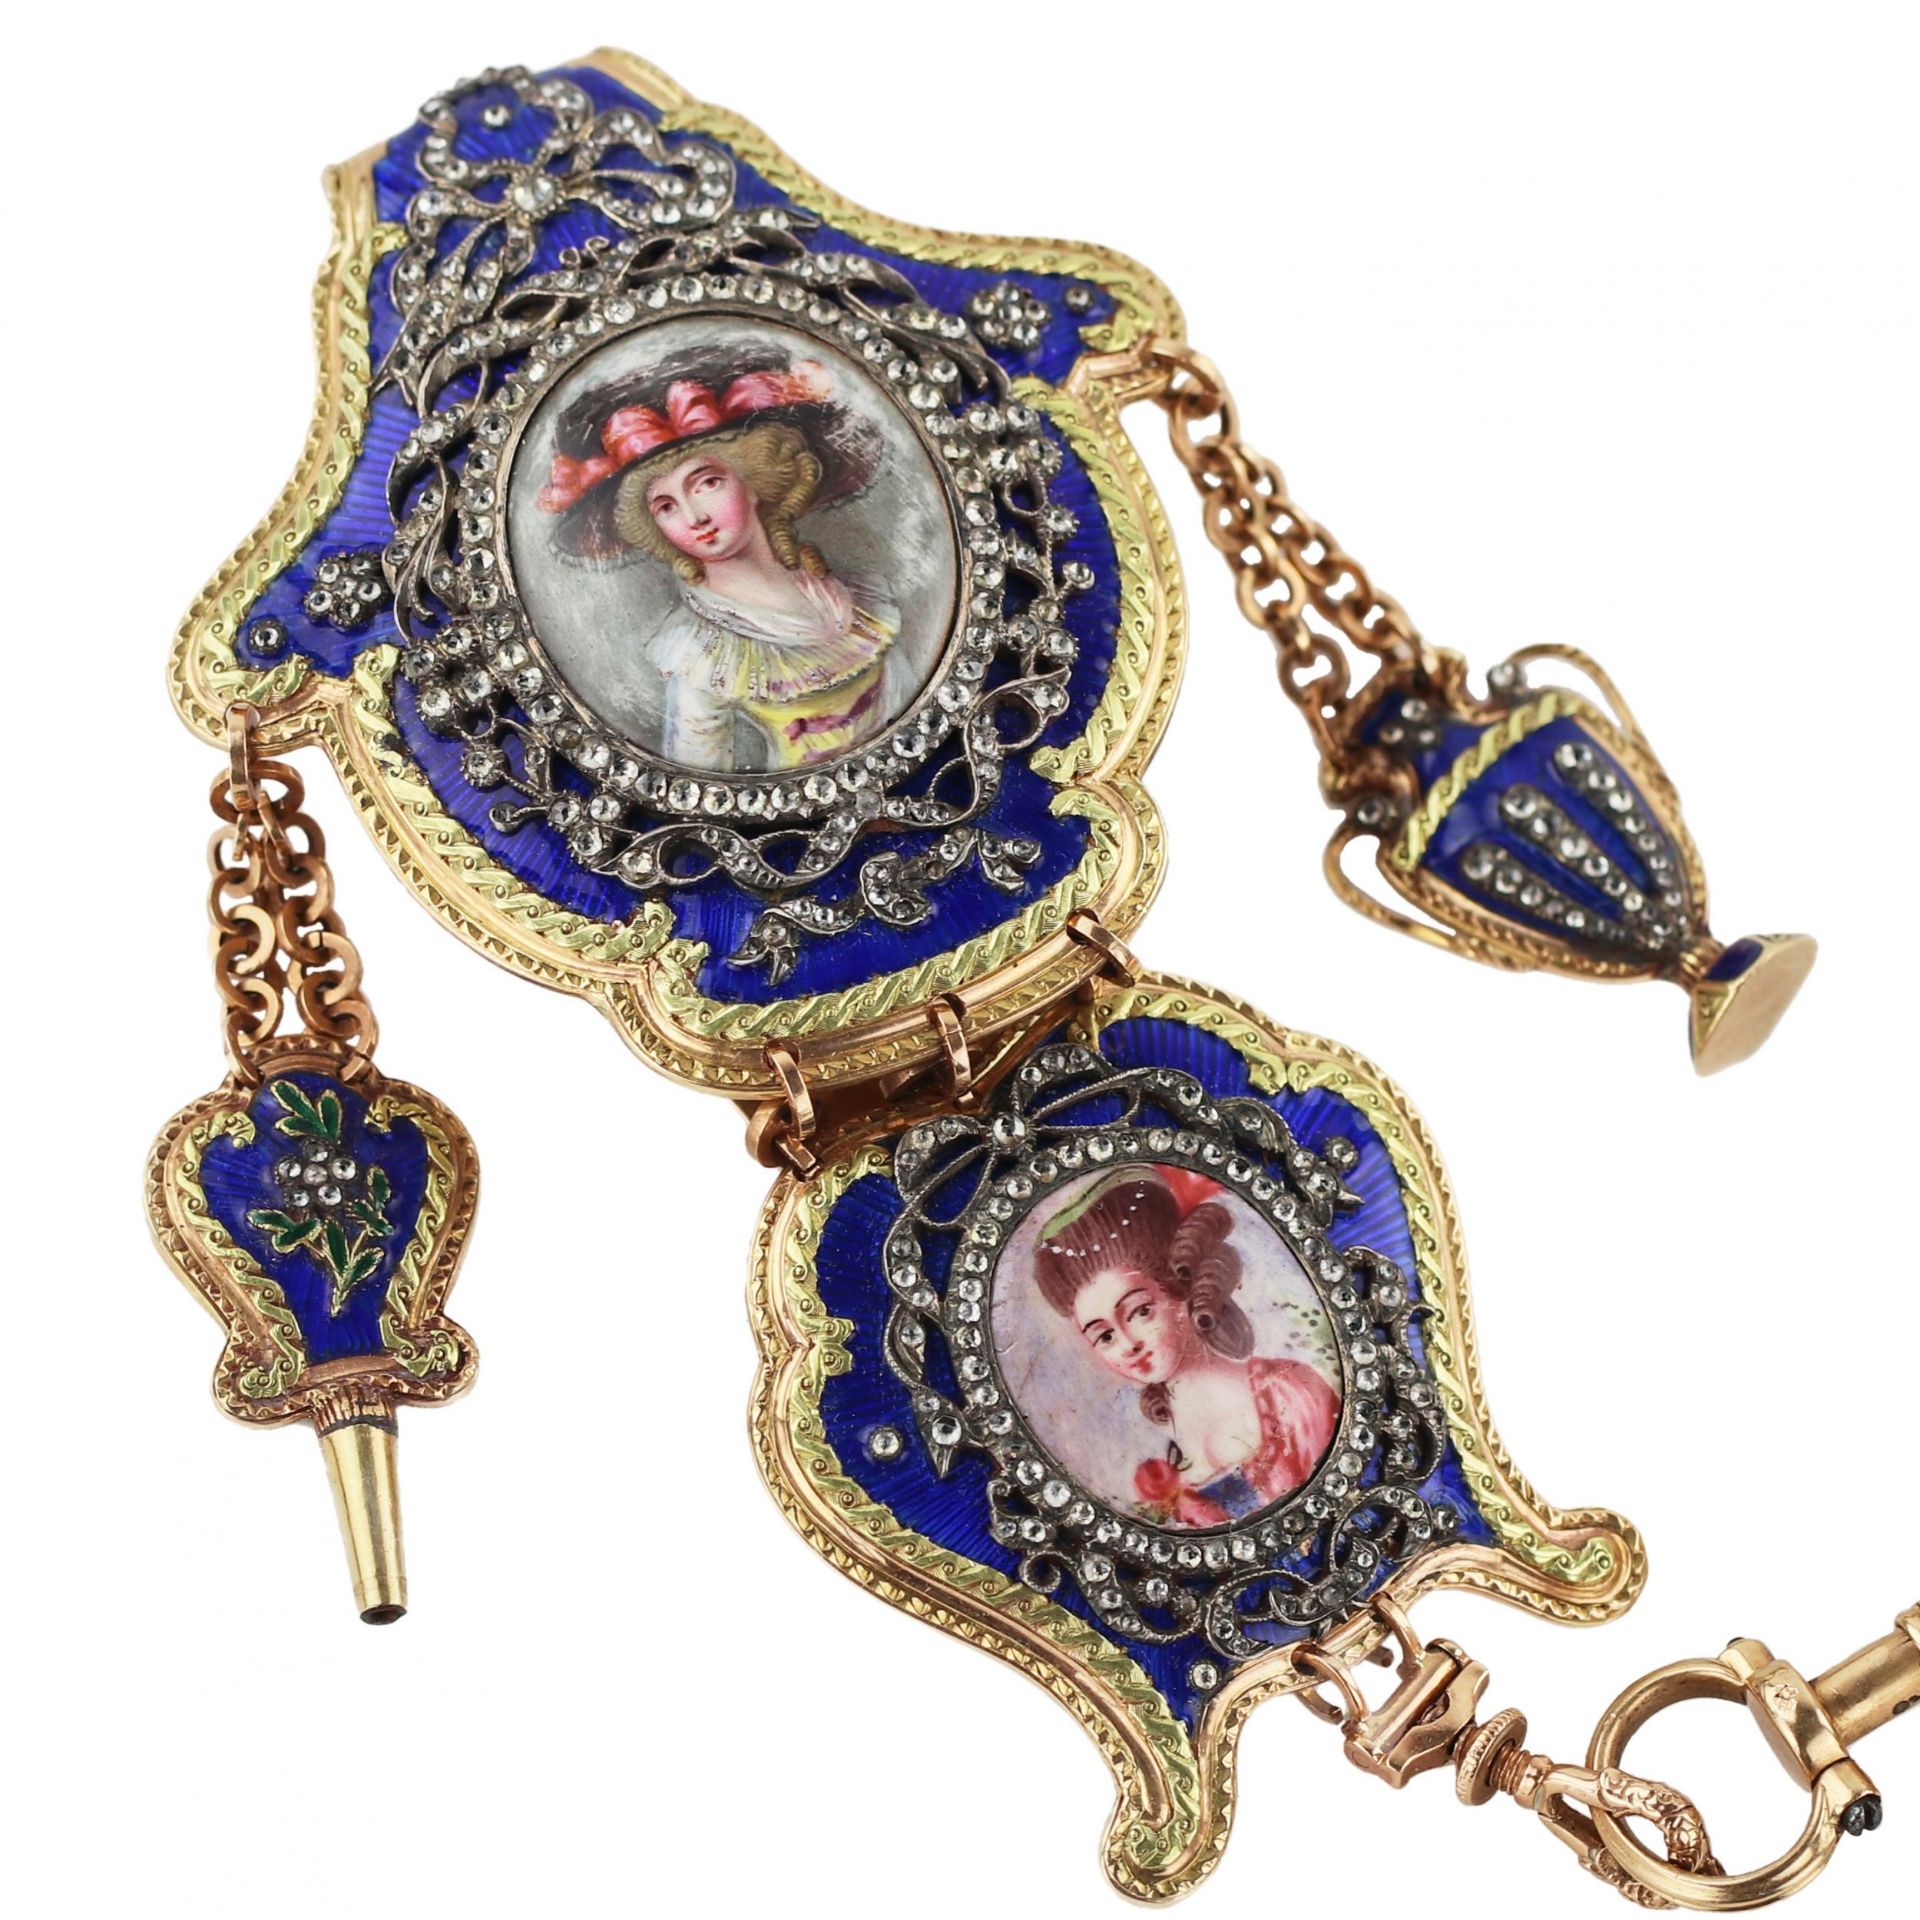 Chatelain with gold pocket watch, diamonds and enamel painting. France 19th century. - Image 5 of 10